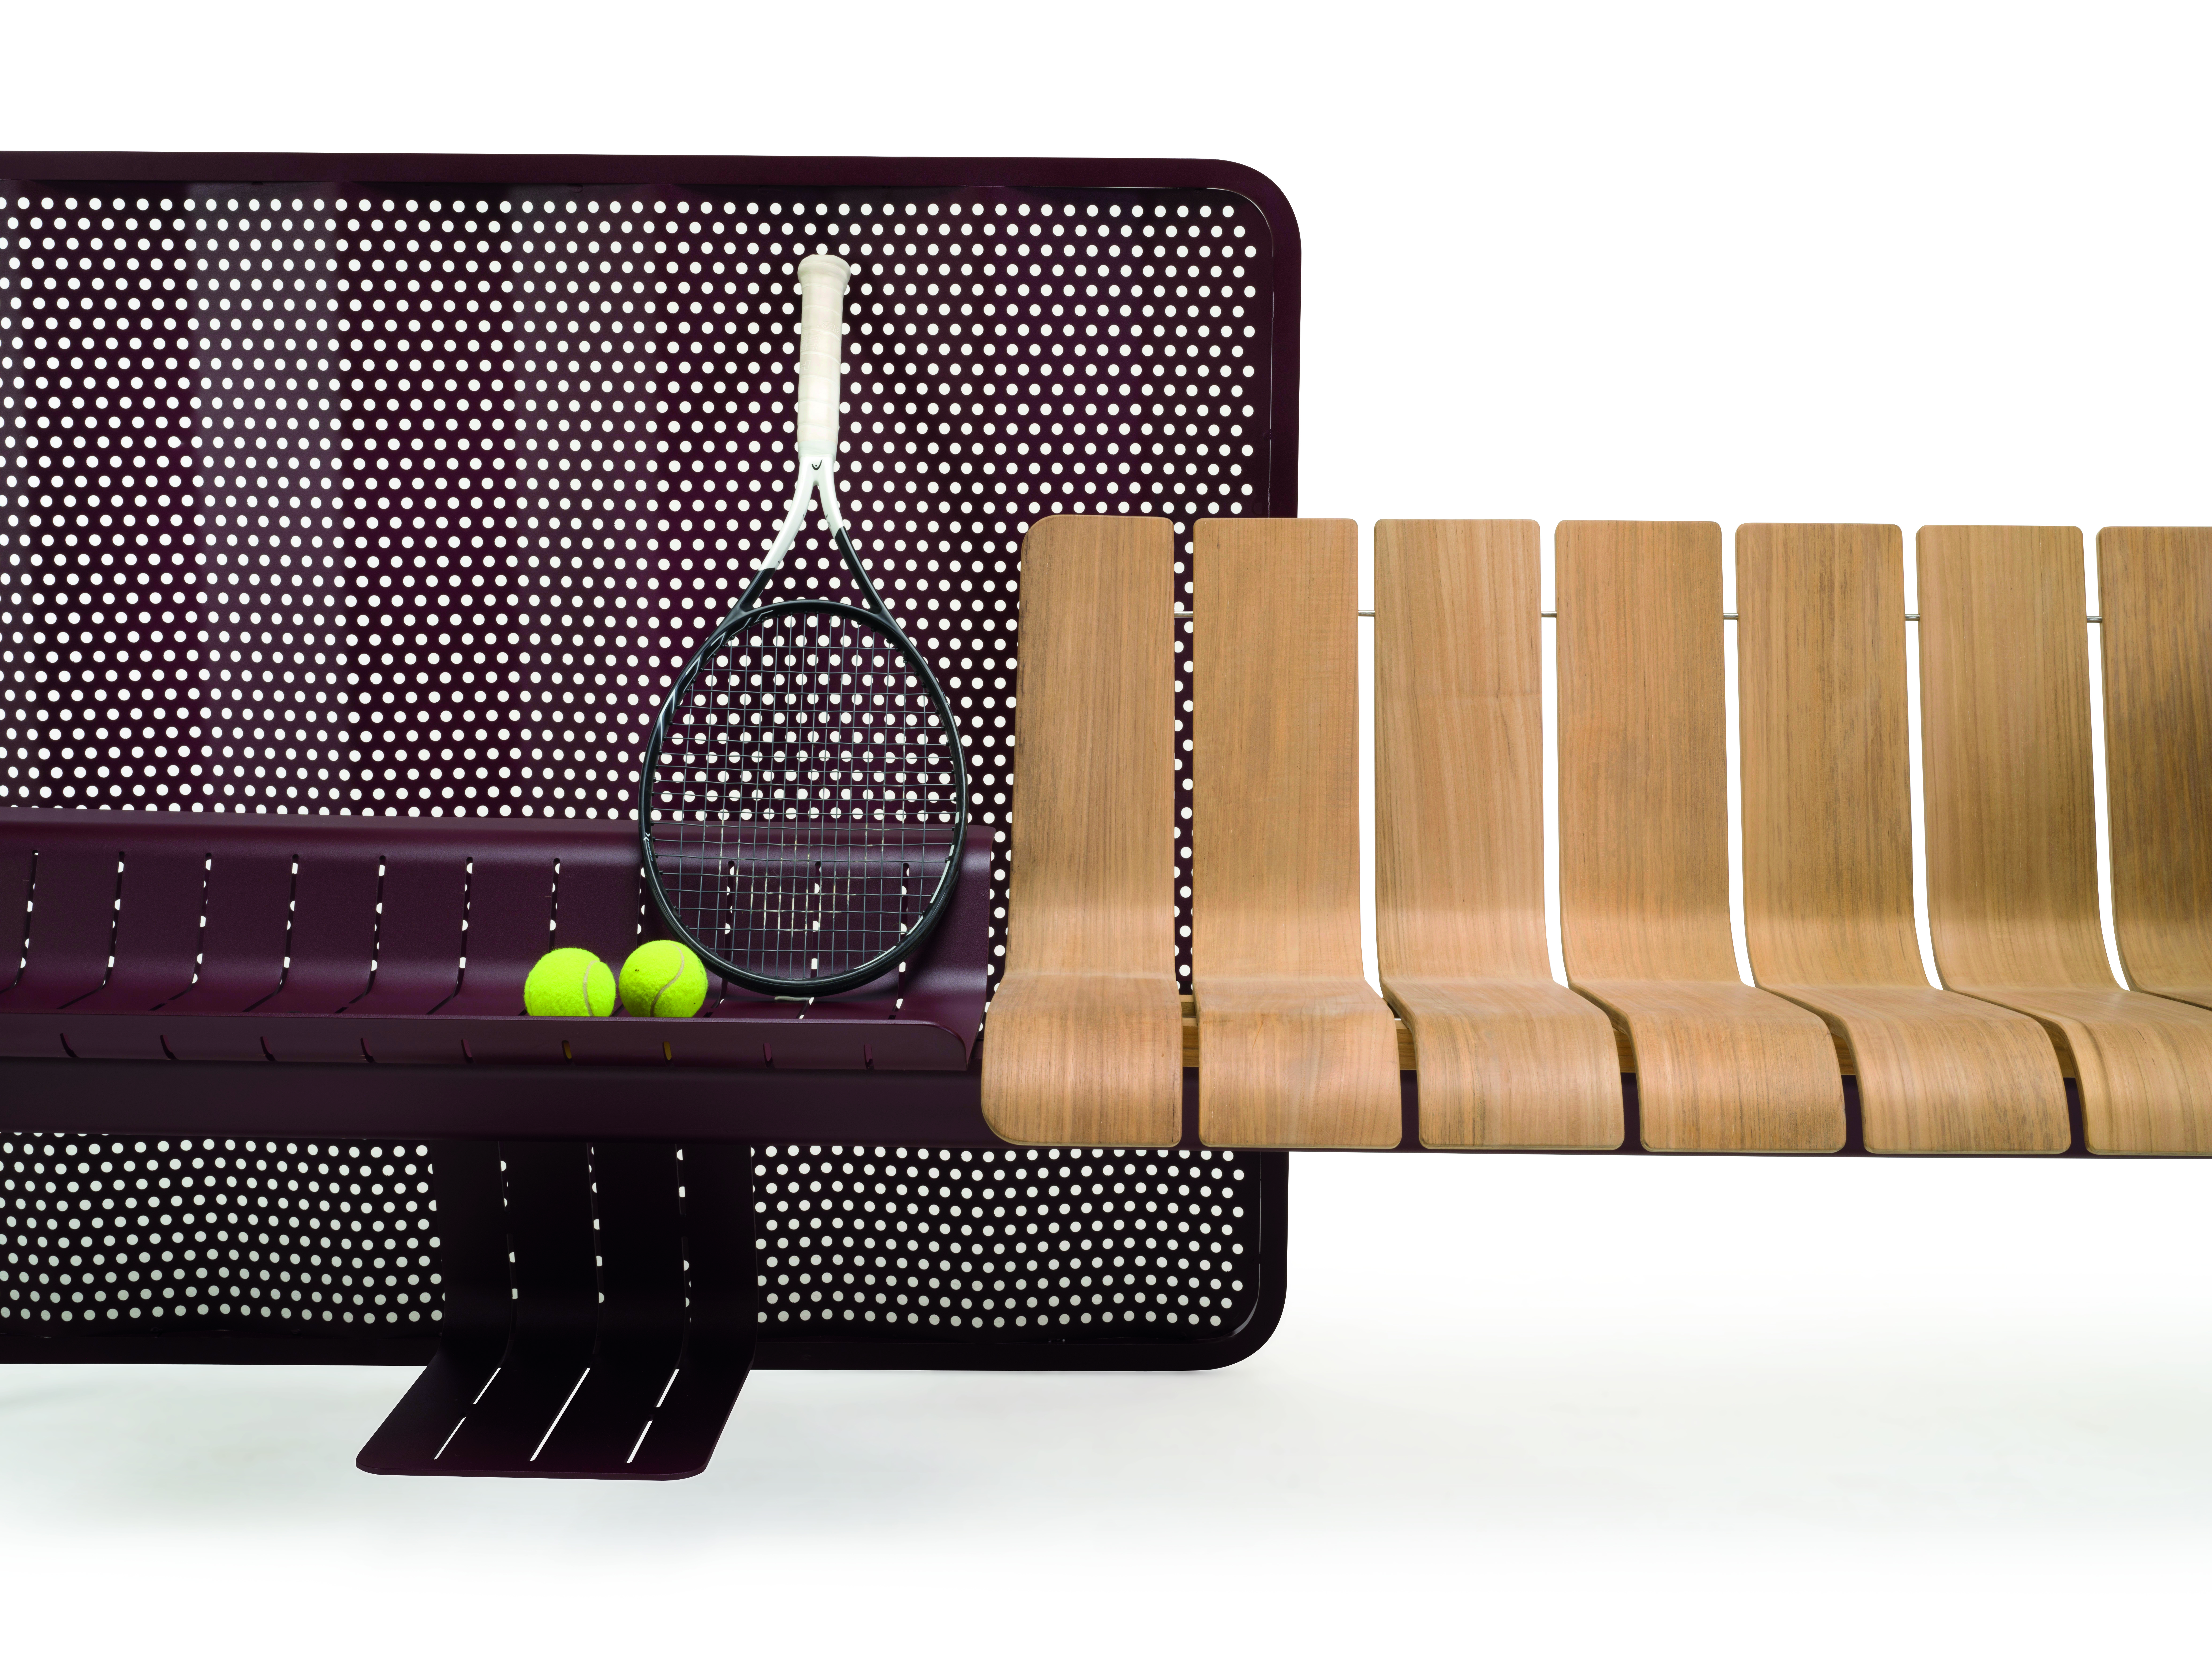 Ethimo Ace detailed view of lon bench with privacy panel and tennis racket/balls